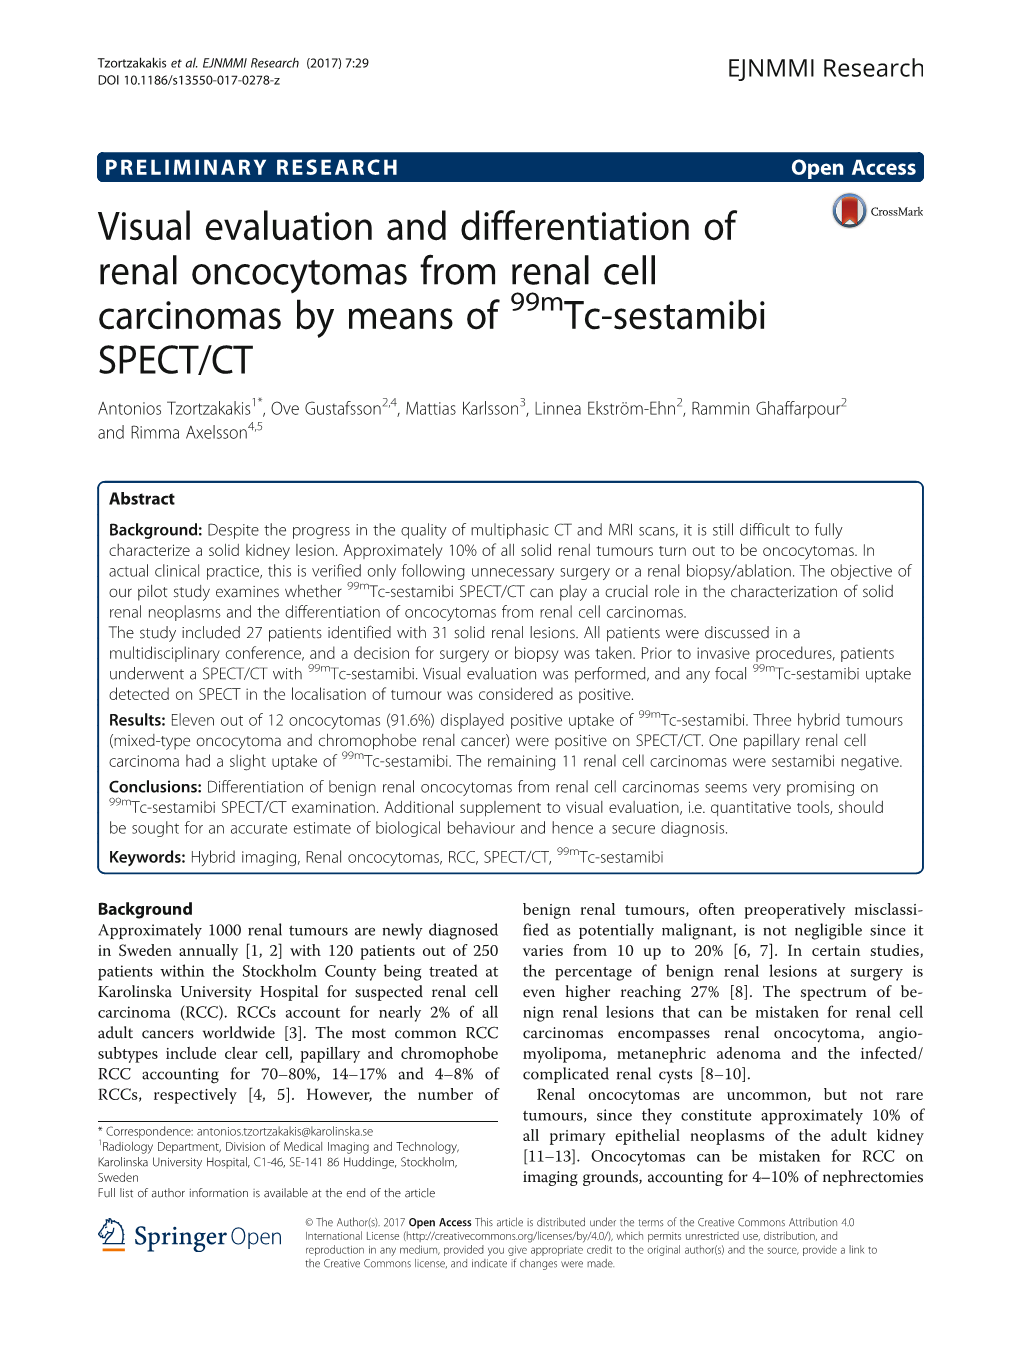 Visual Evaluation and Differentiation of Renal Oncocytomas from Renal Cell